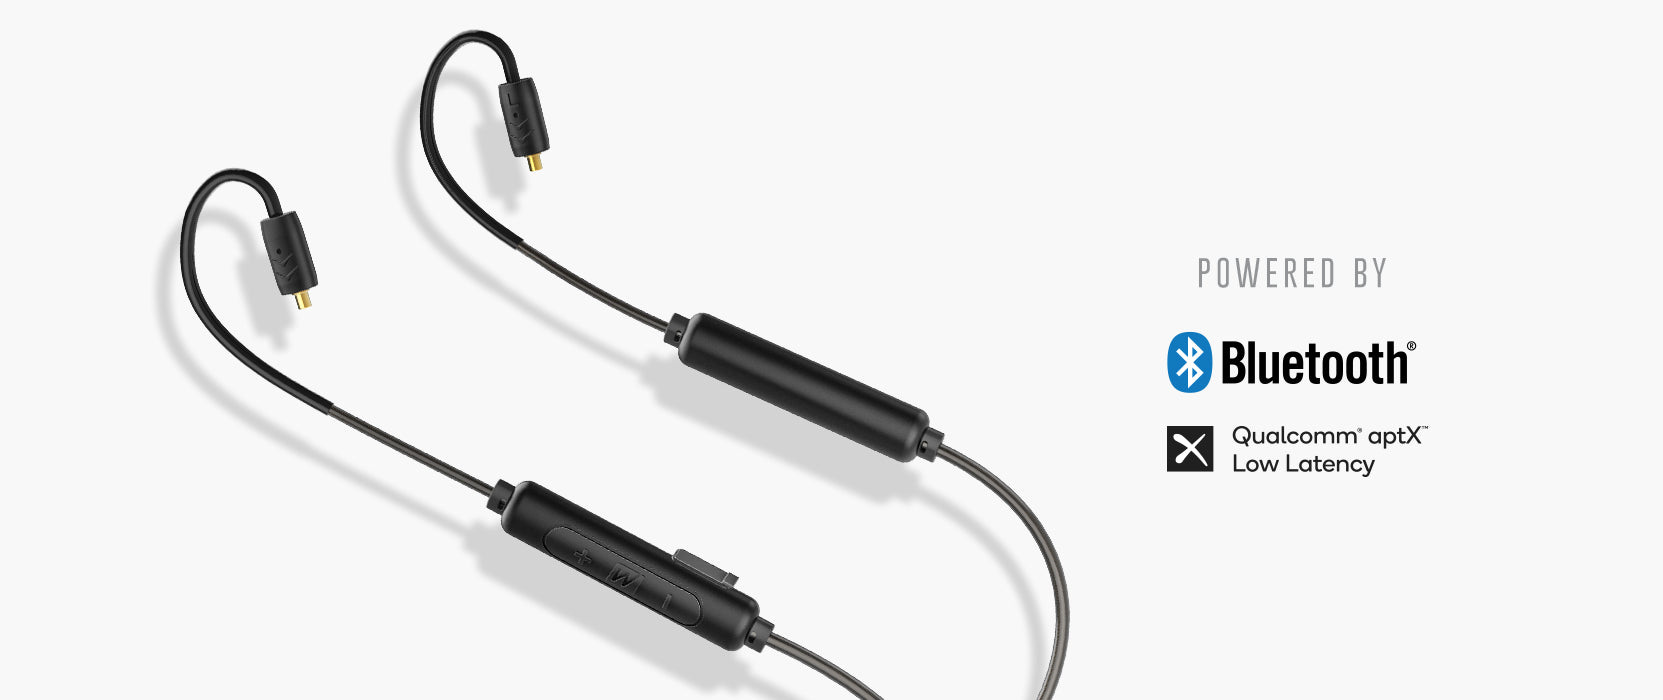 BTX2 MMCX Bluetooth cable powered by Qualcomm aptX technology